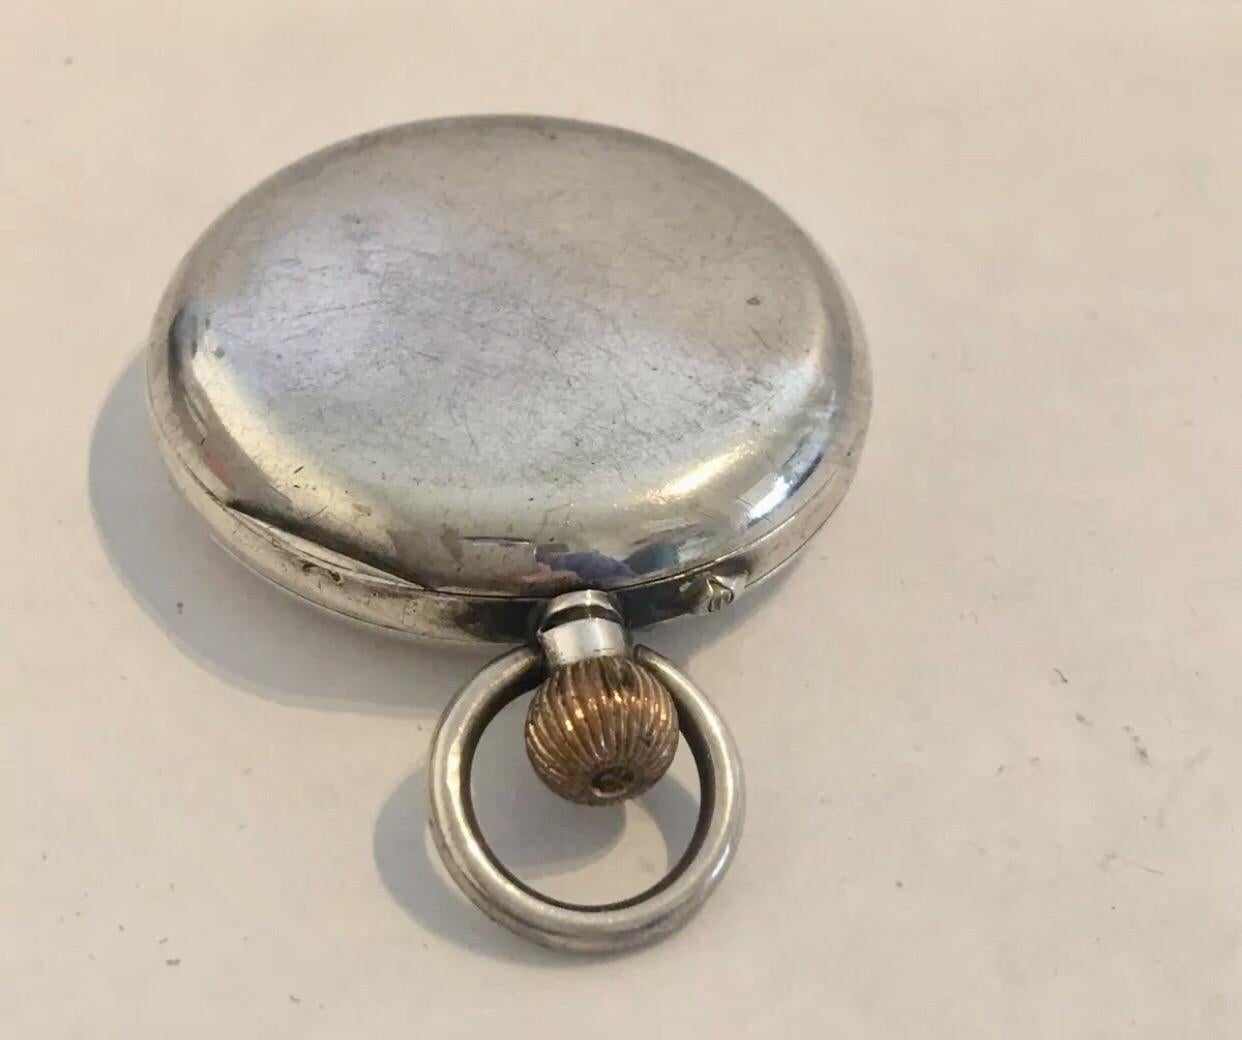 This beautiful 50mm diameter keyless hand winding pocket watch is in good working condition and it is ticking well. Visible signs of ageing and wear with small and light surface marks on the watch case as shown. Please study the images carefully as